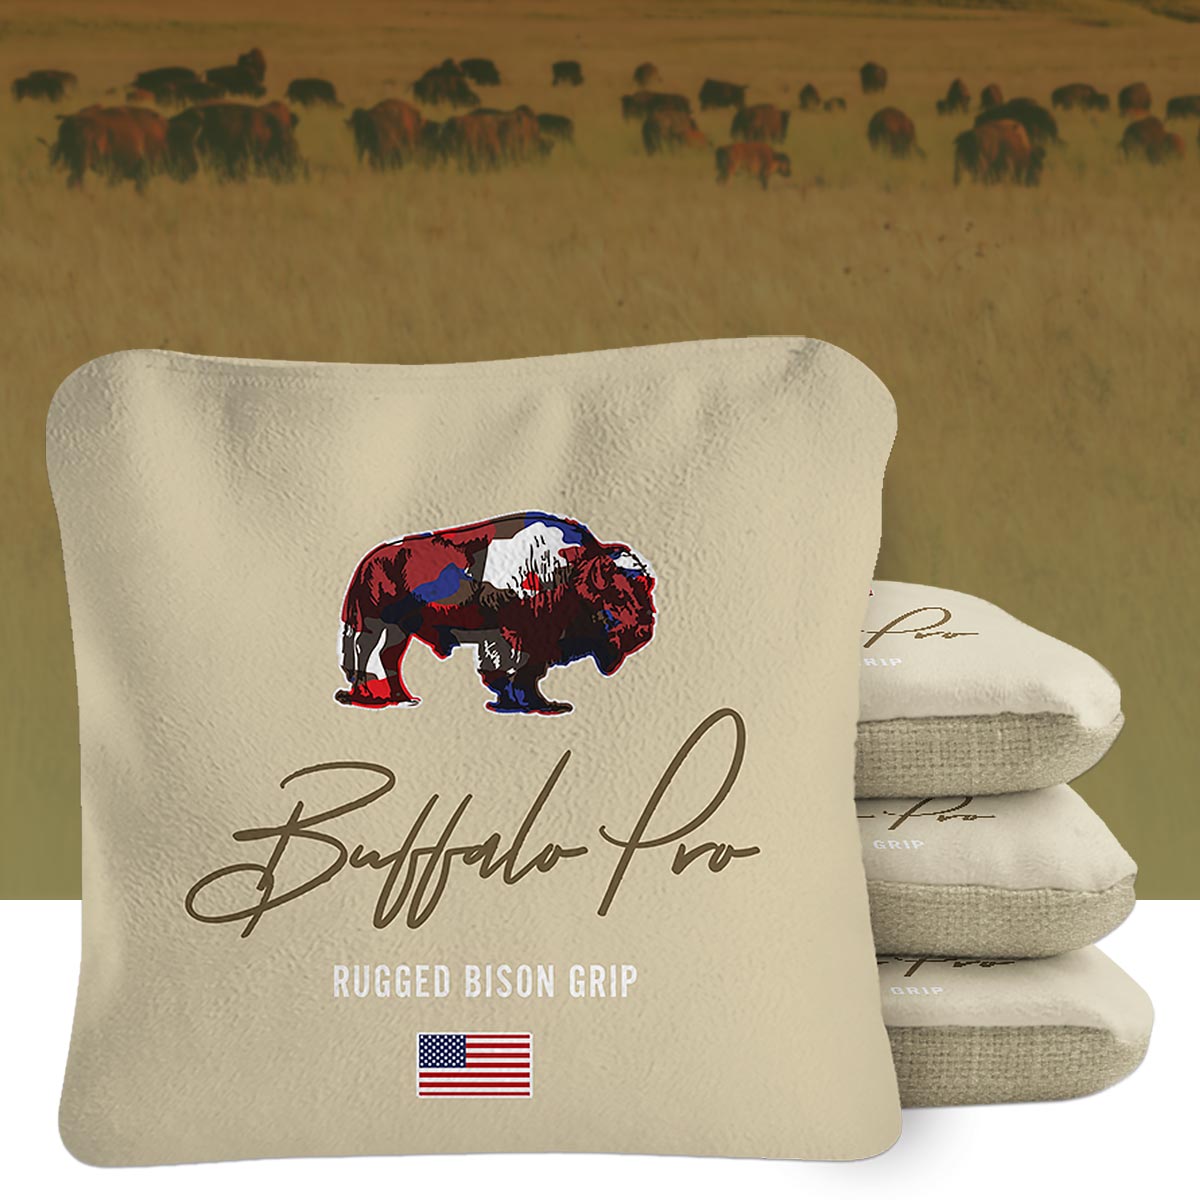 Celebrate National Bison Day with Synergy Buffalo Pro cornhole bags!